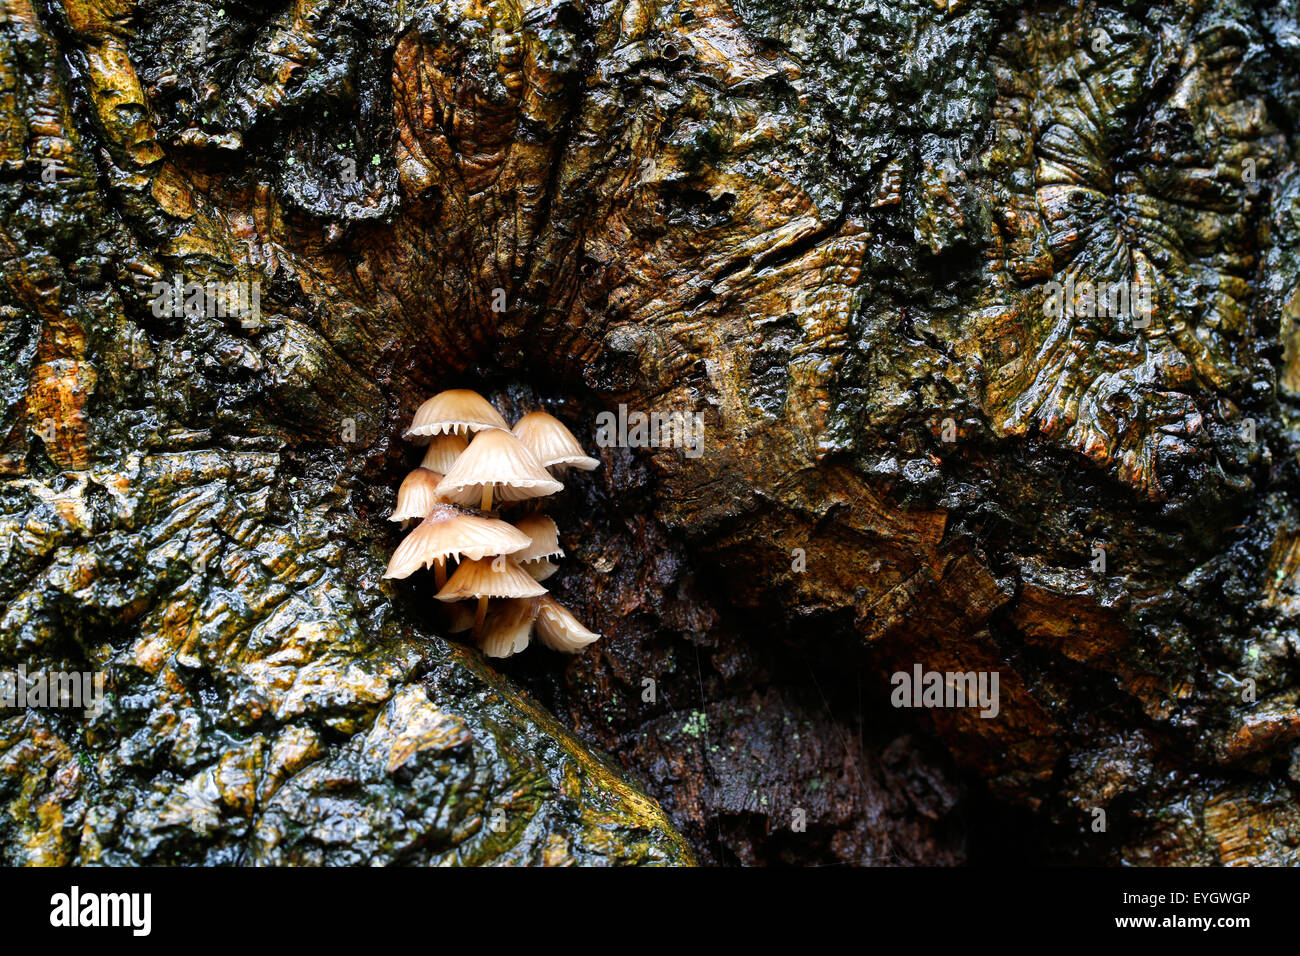 A cluster, or clump, of sulphur tuft mushrooms, Hypholoma fasciculare, growing in a damp, wet tree hollow in an English woodland area Stock Photo